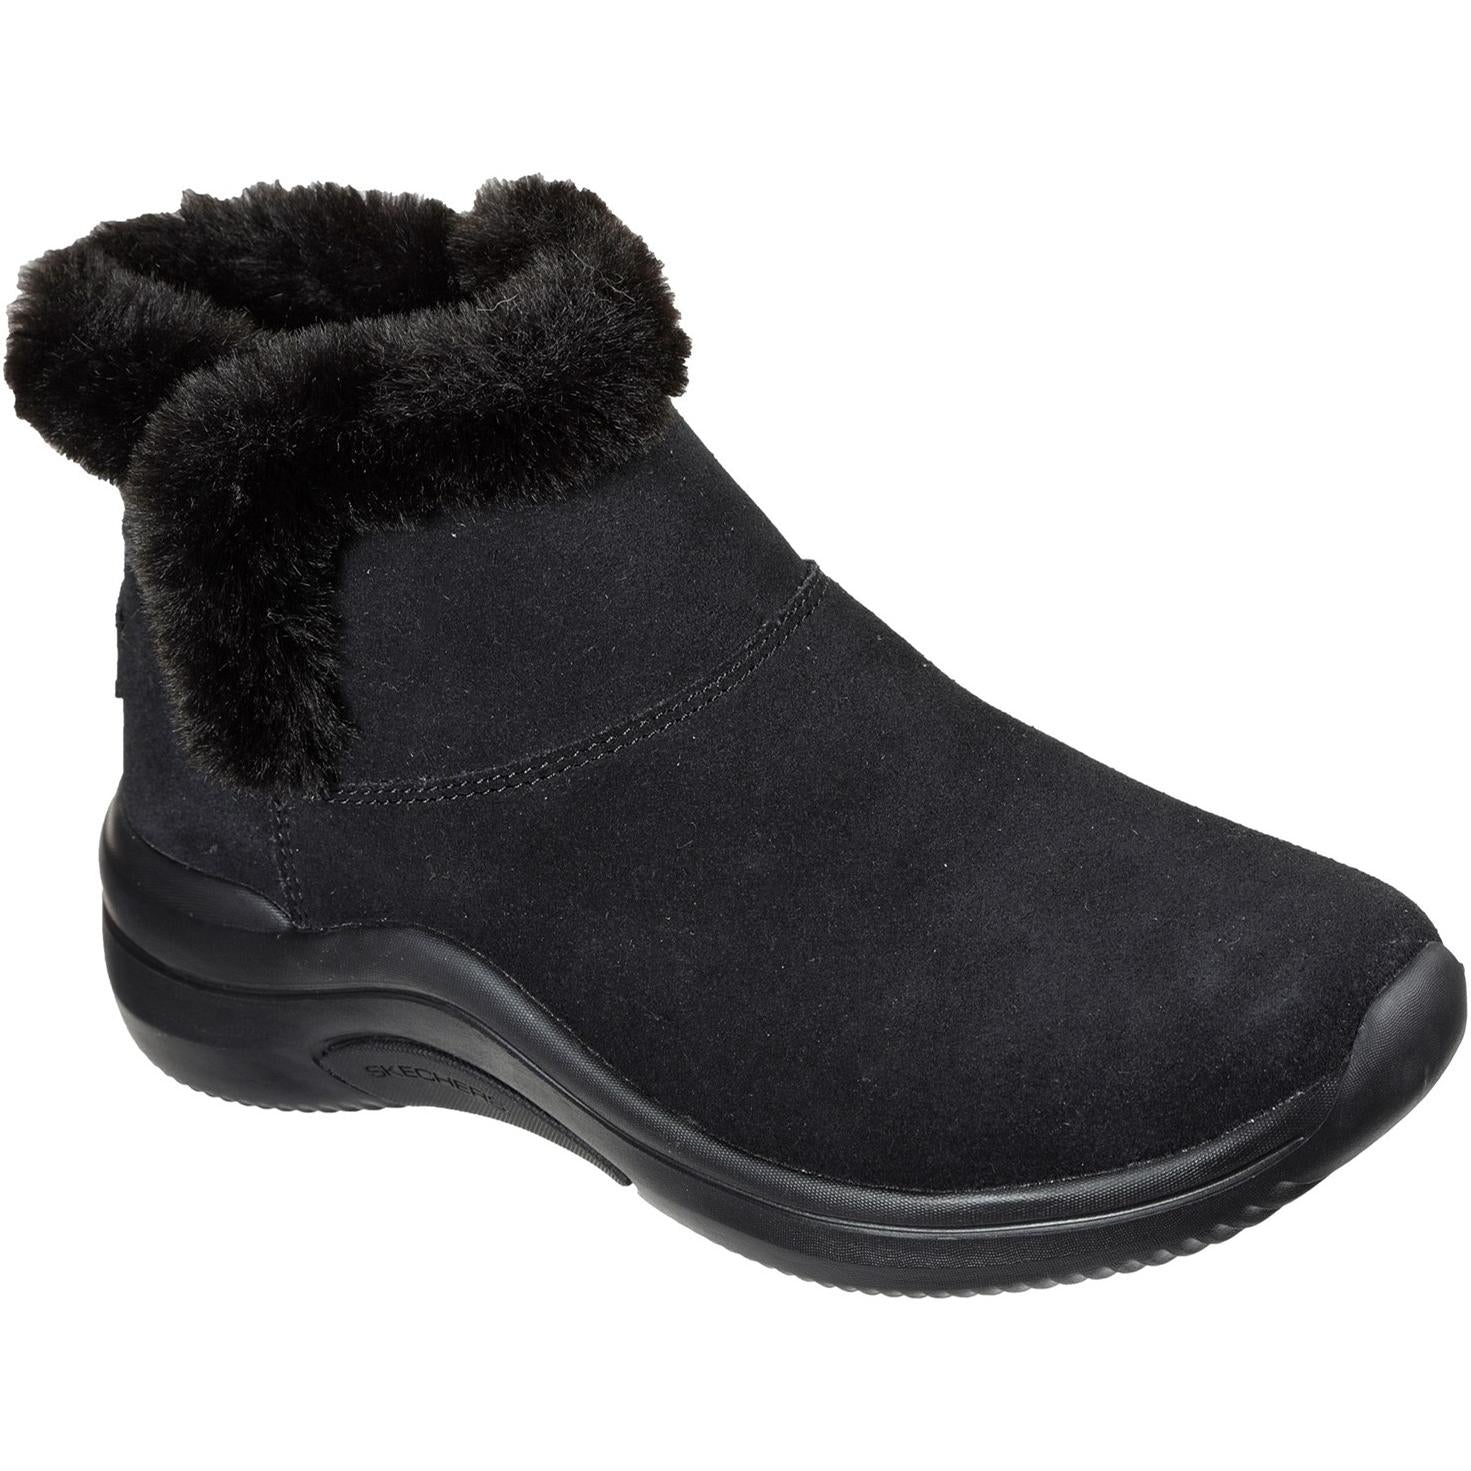 Skechers On The GO Midtown So Plush Ankle Boot